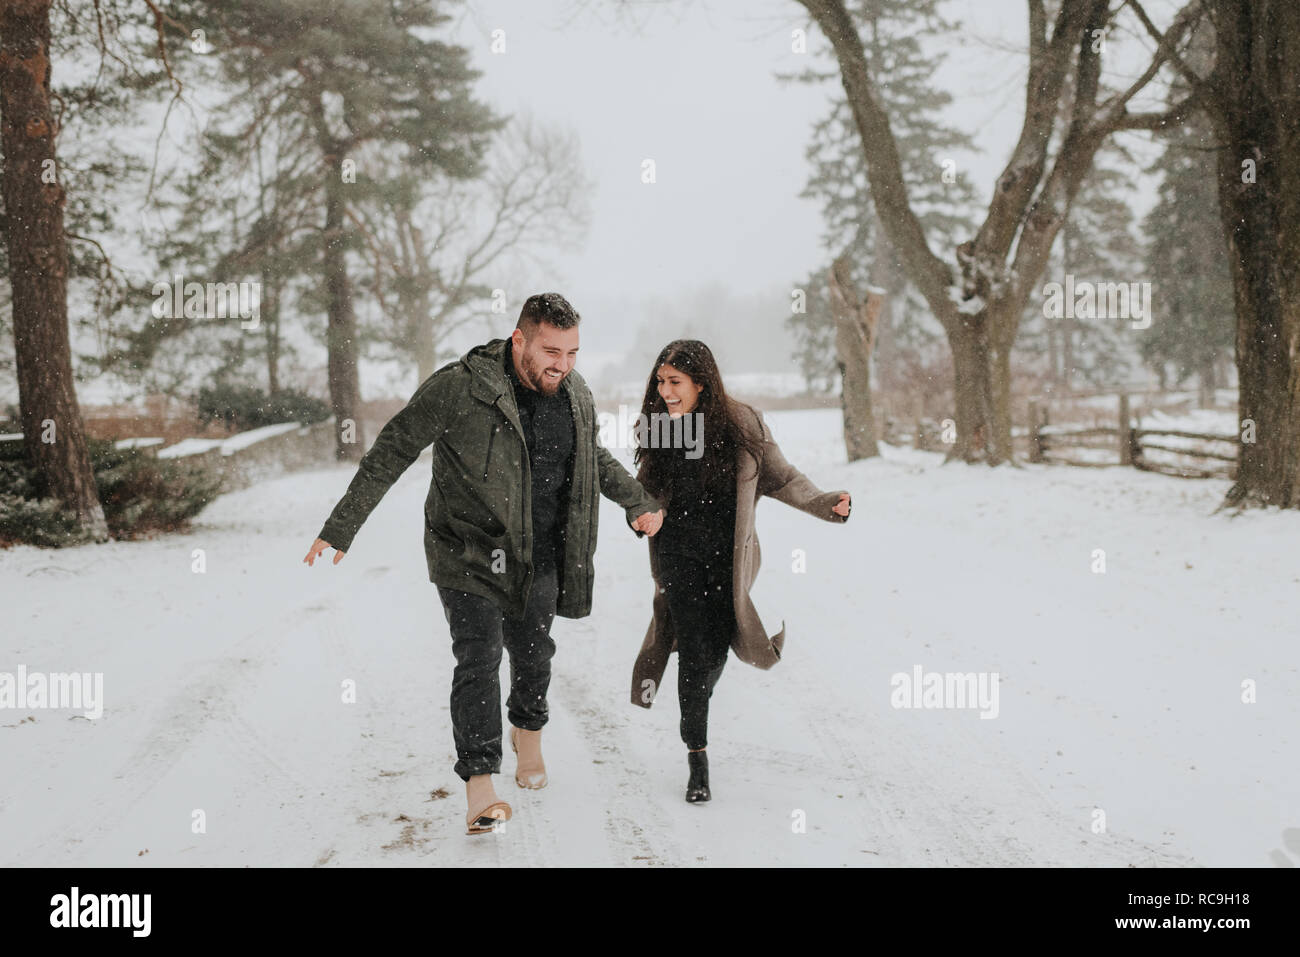 Couple running in snowy landscape, Georgetown, Canada Banque D'Images